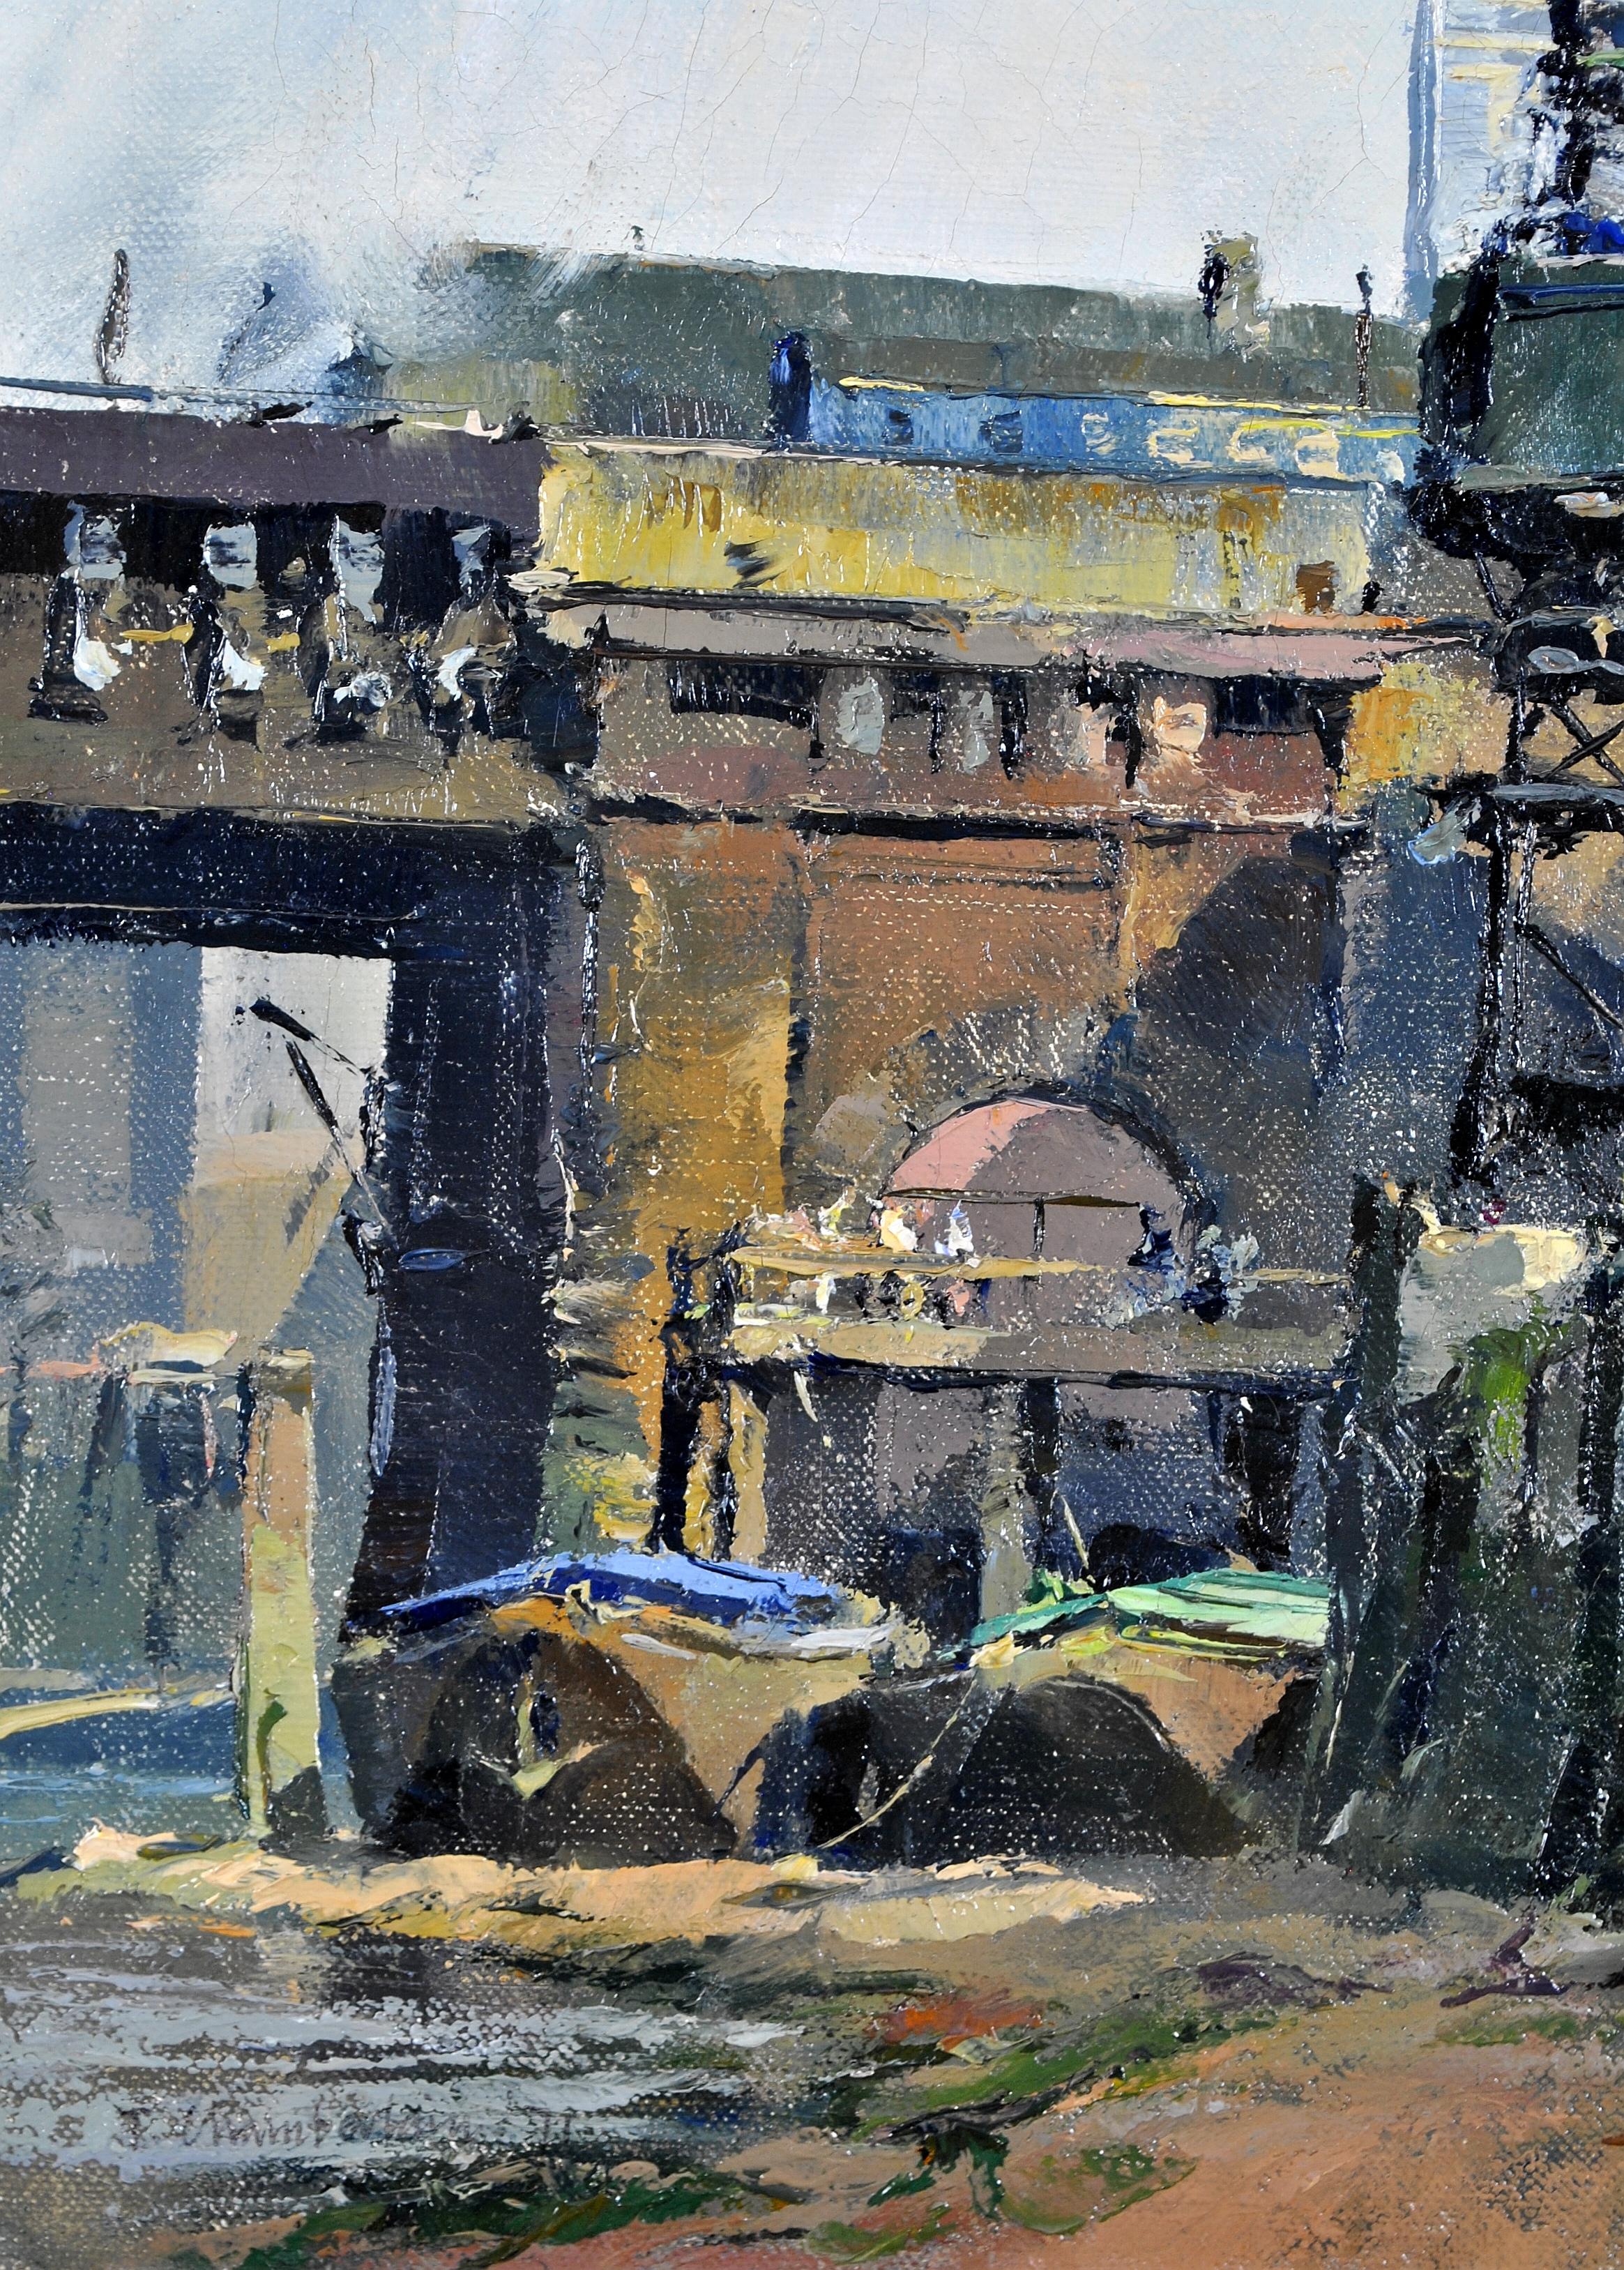 A fine oil on canvas by Trevor Chamberlain depicting the view under Cannon Street Bridge from the Thames river. The artist would have stood on the muddy banks of the river with his easel to execute this excellent quality work with a beautiful